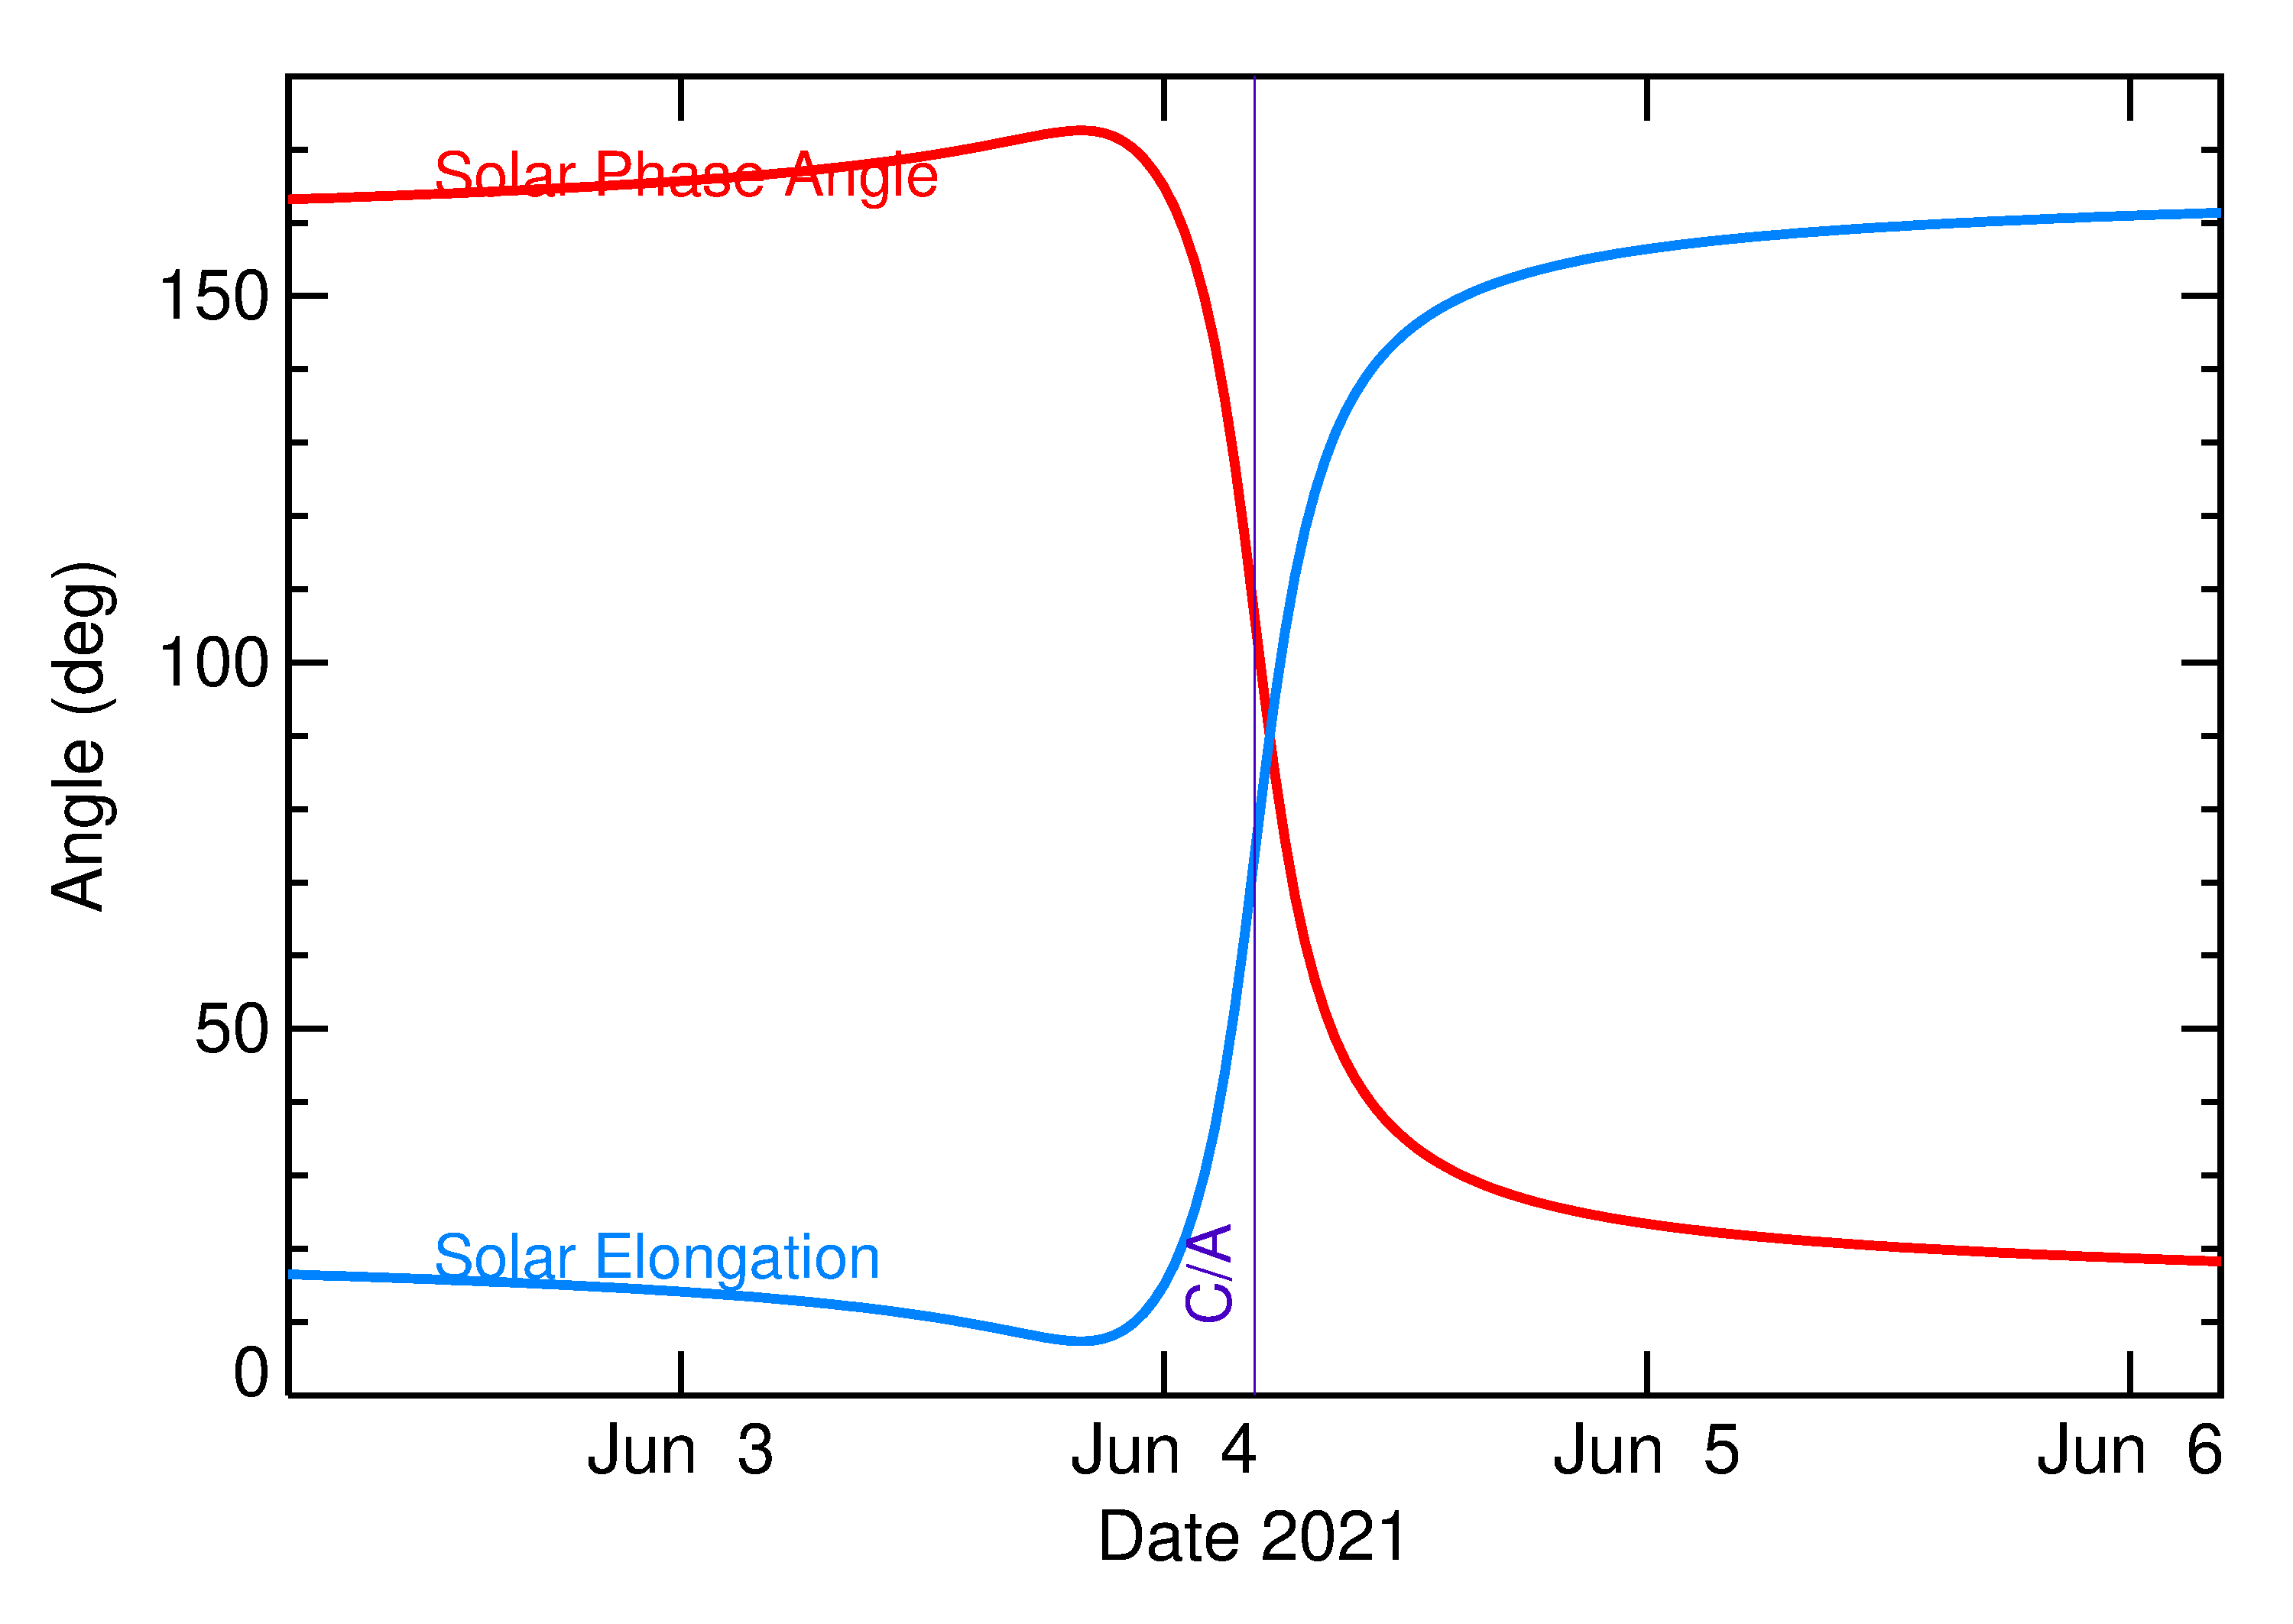 Solar Elongation and Solar Phase Angle of 2021 LX1 in the days around closest approach